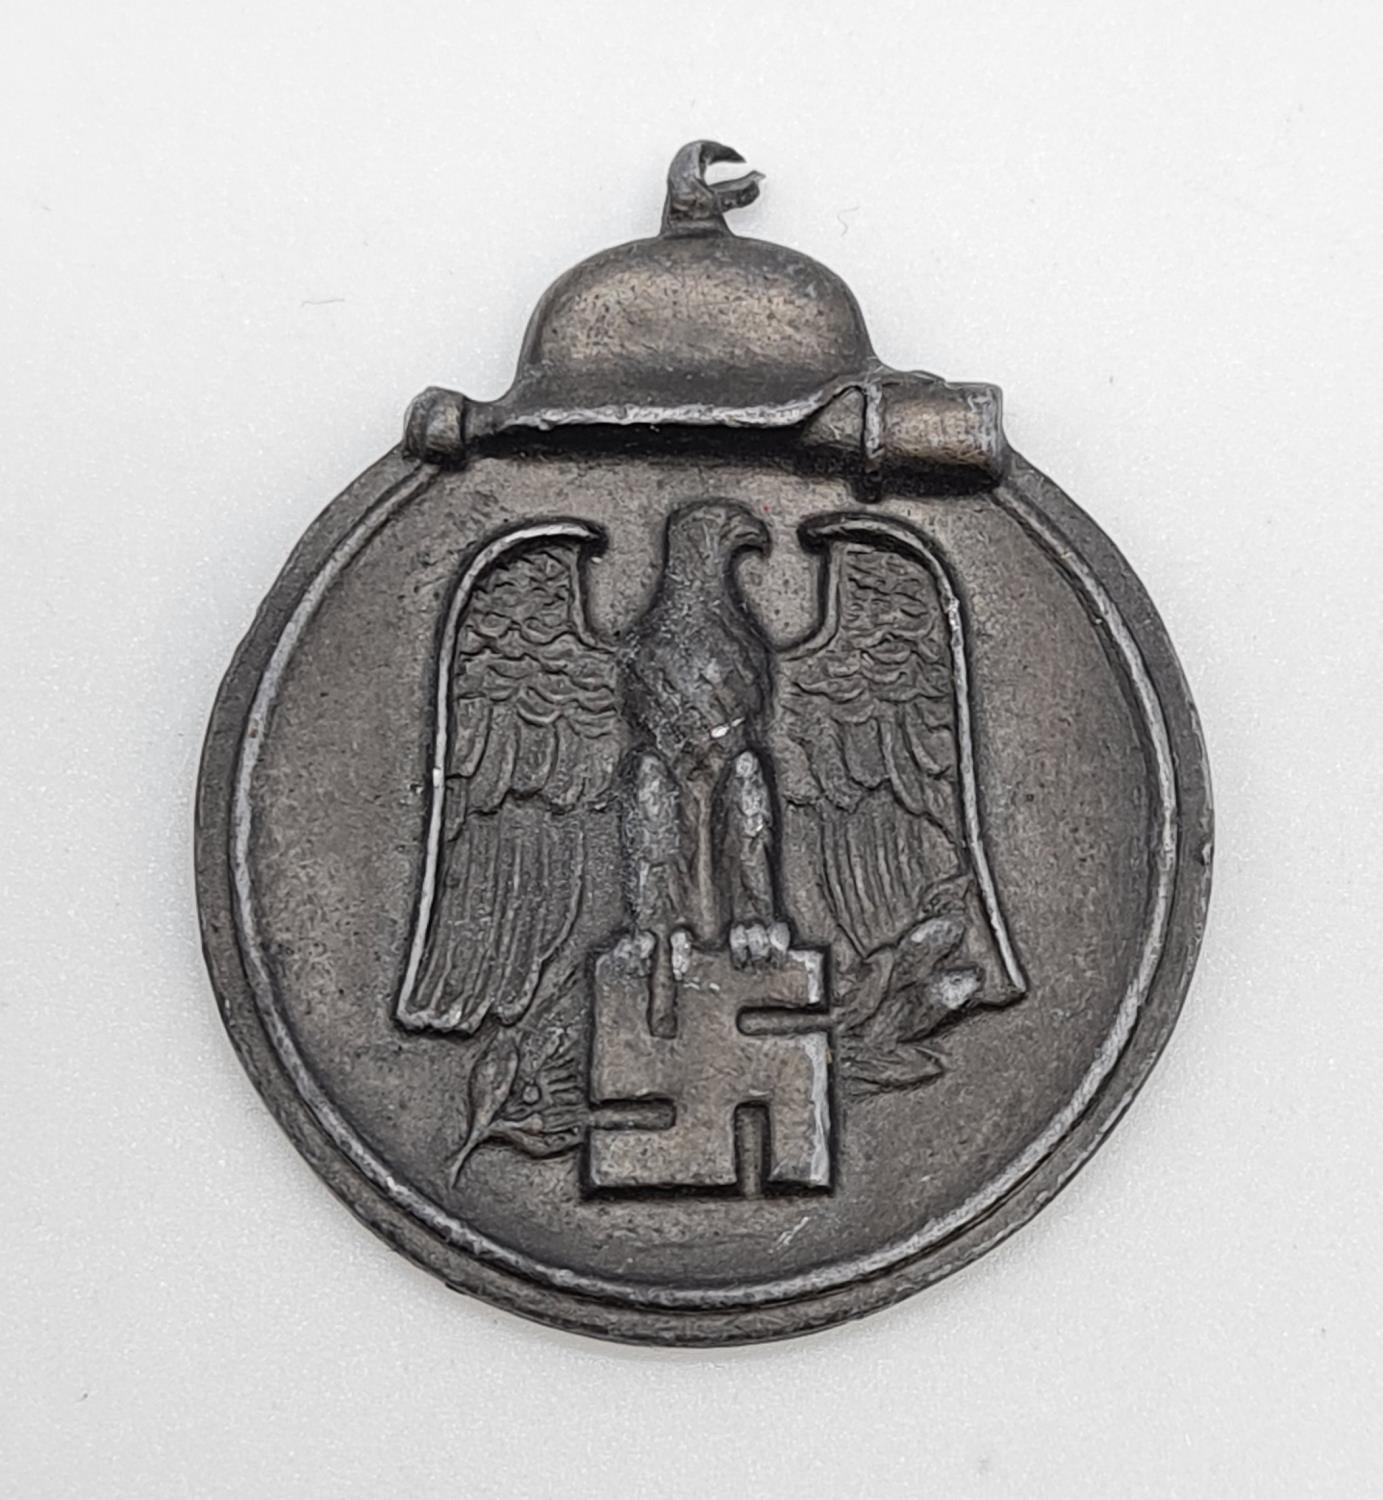 1941/42 Nazi Badge / Medal with broken bail - Image 2 of 2